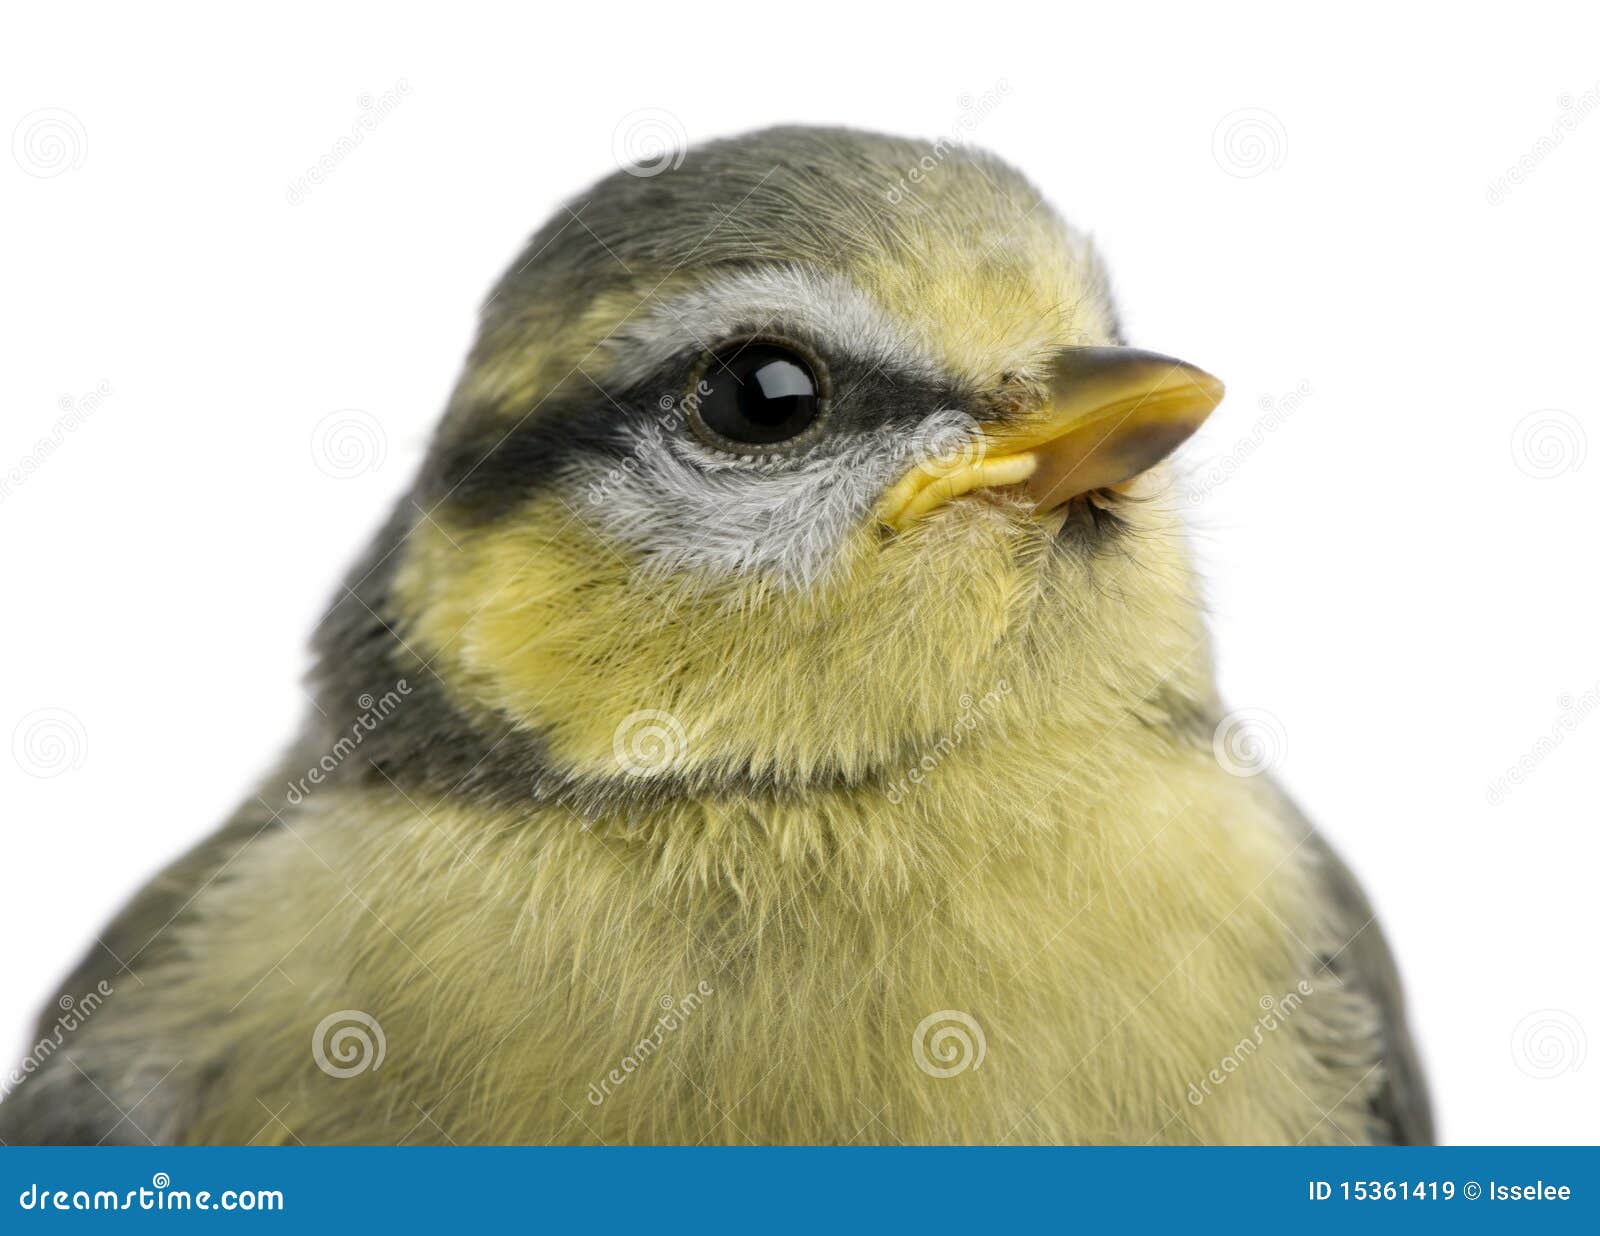 young blue tit, cyanistes caeruleus, 23 days old